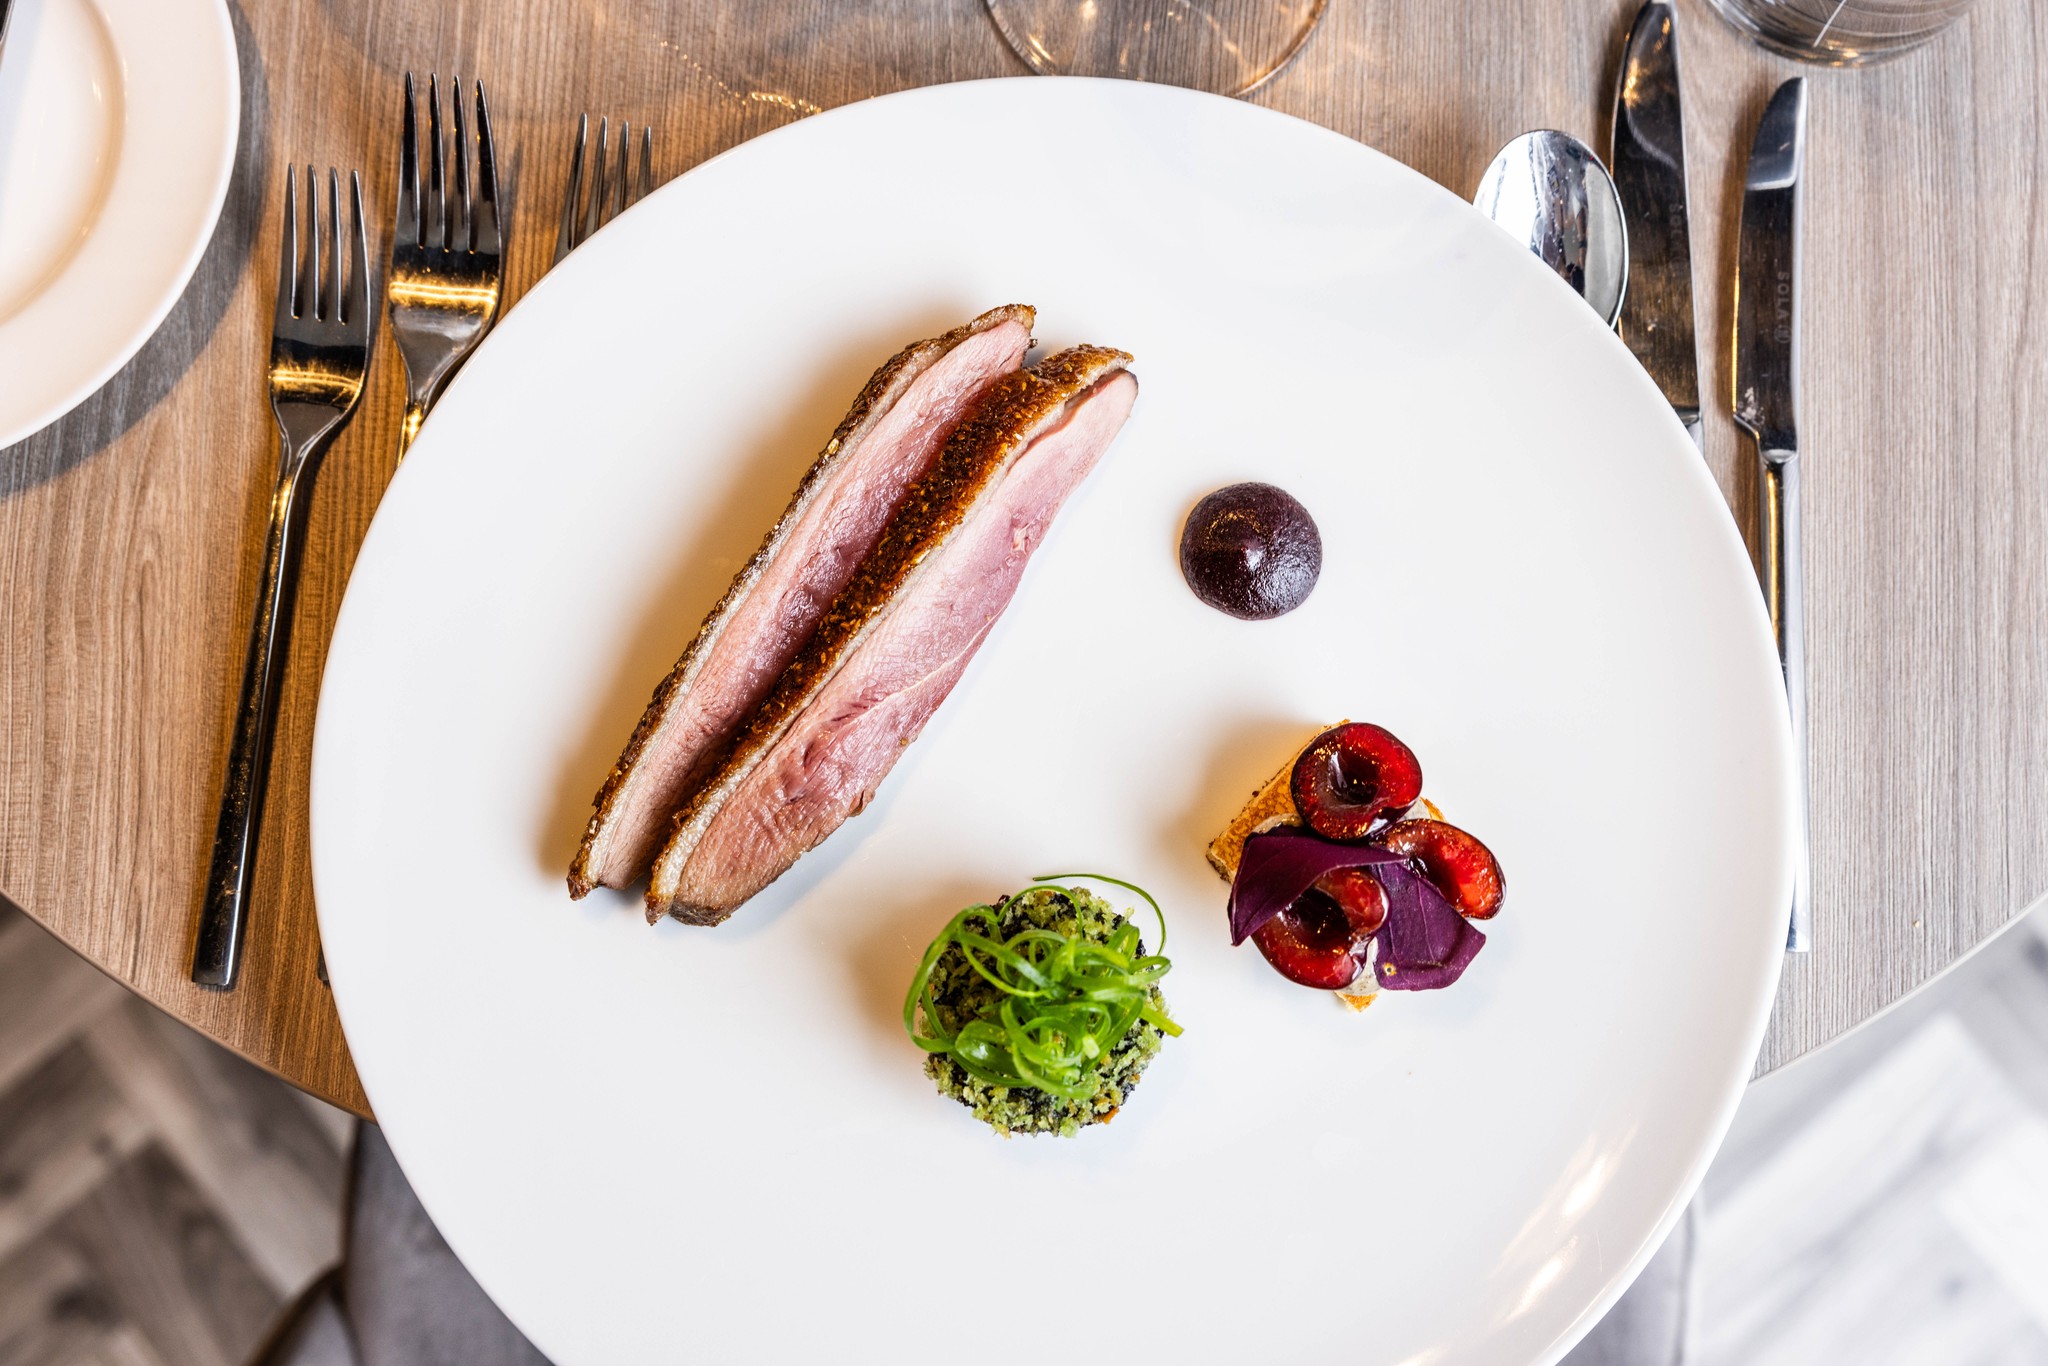 Devonshire duck dish from Marcus Wareing at the Rosewater Pavilion at the 2023 Wimbledon Championships 